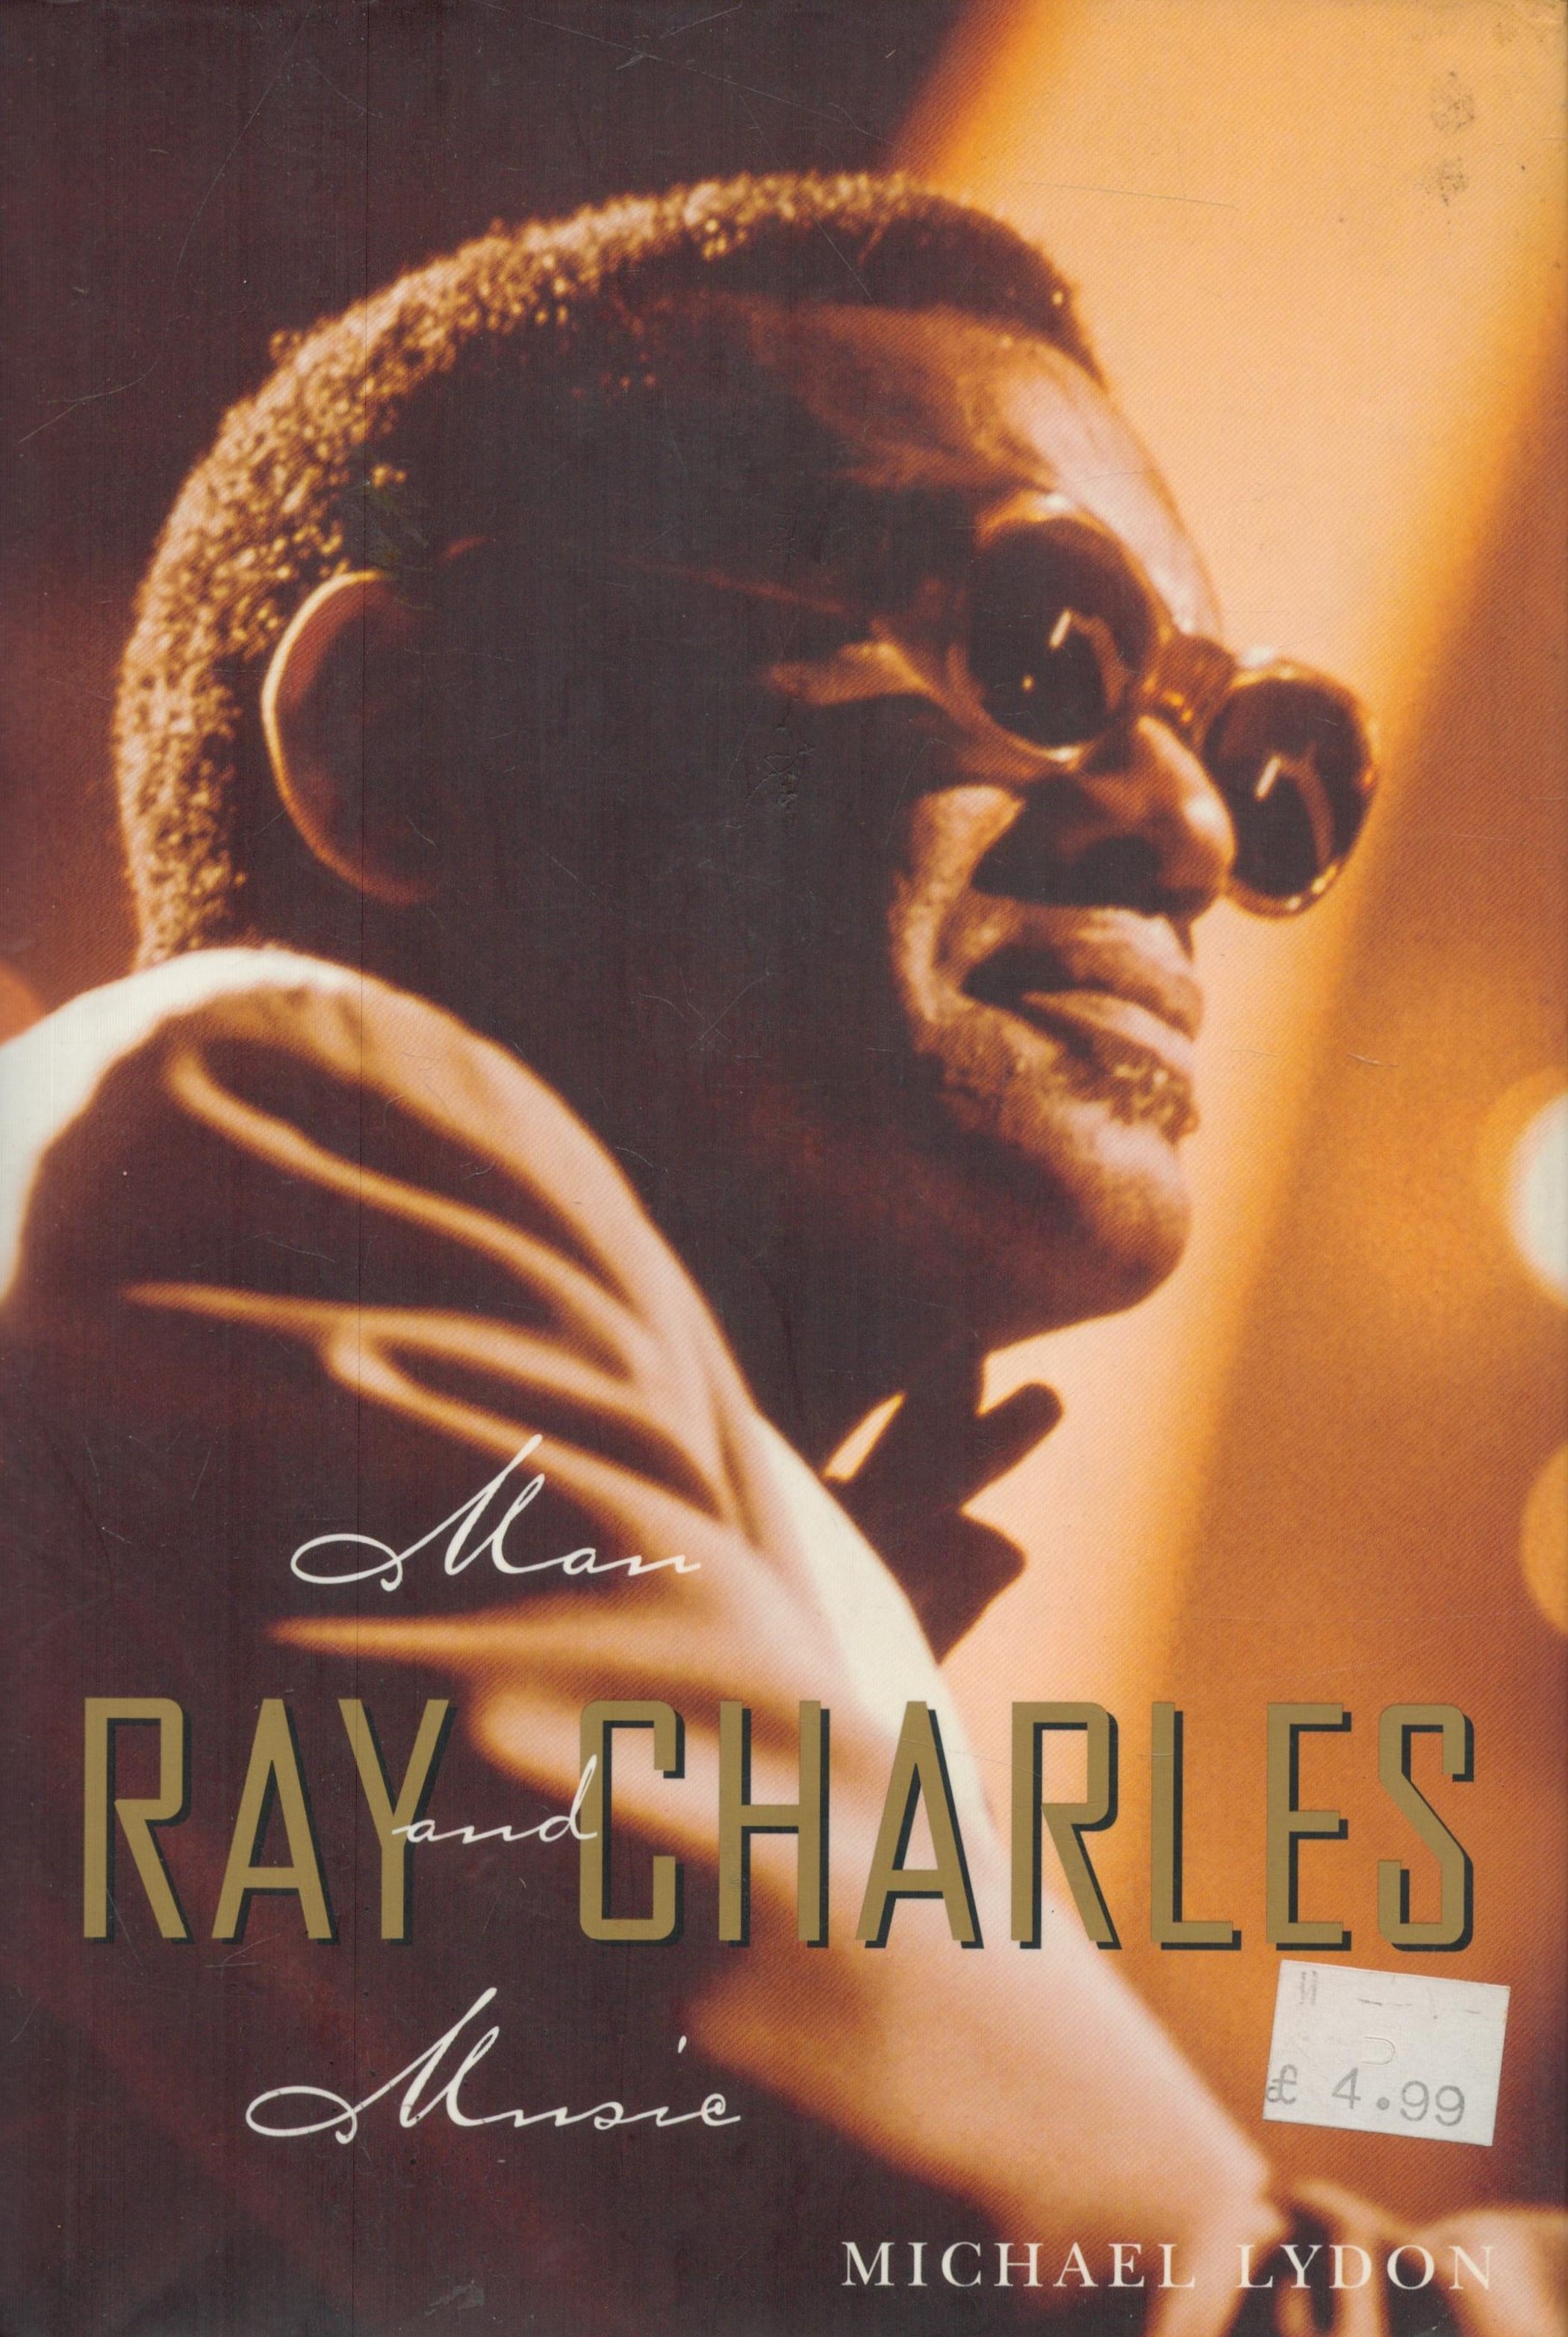 Ray Charles - Man and Music by Michael Lydon 1998 First Edition Hardback Book published by Riverhead